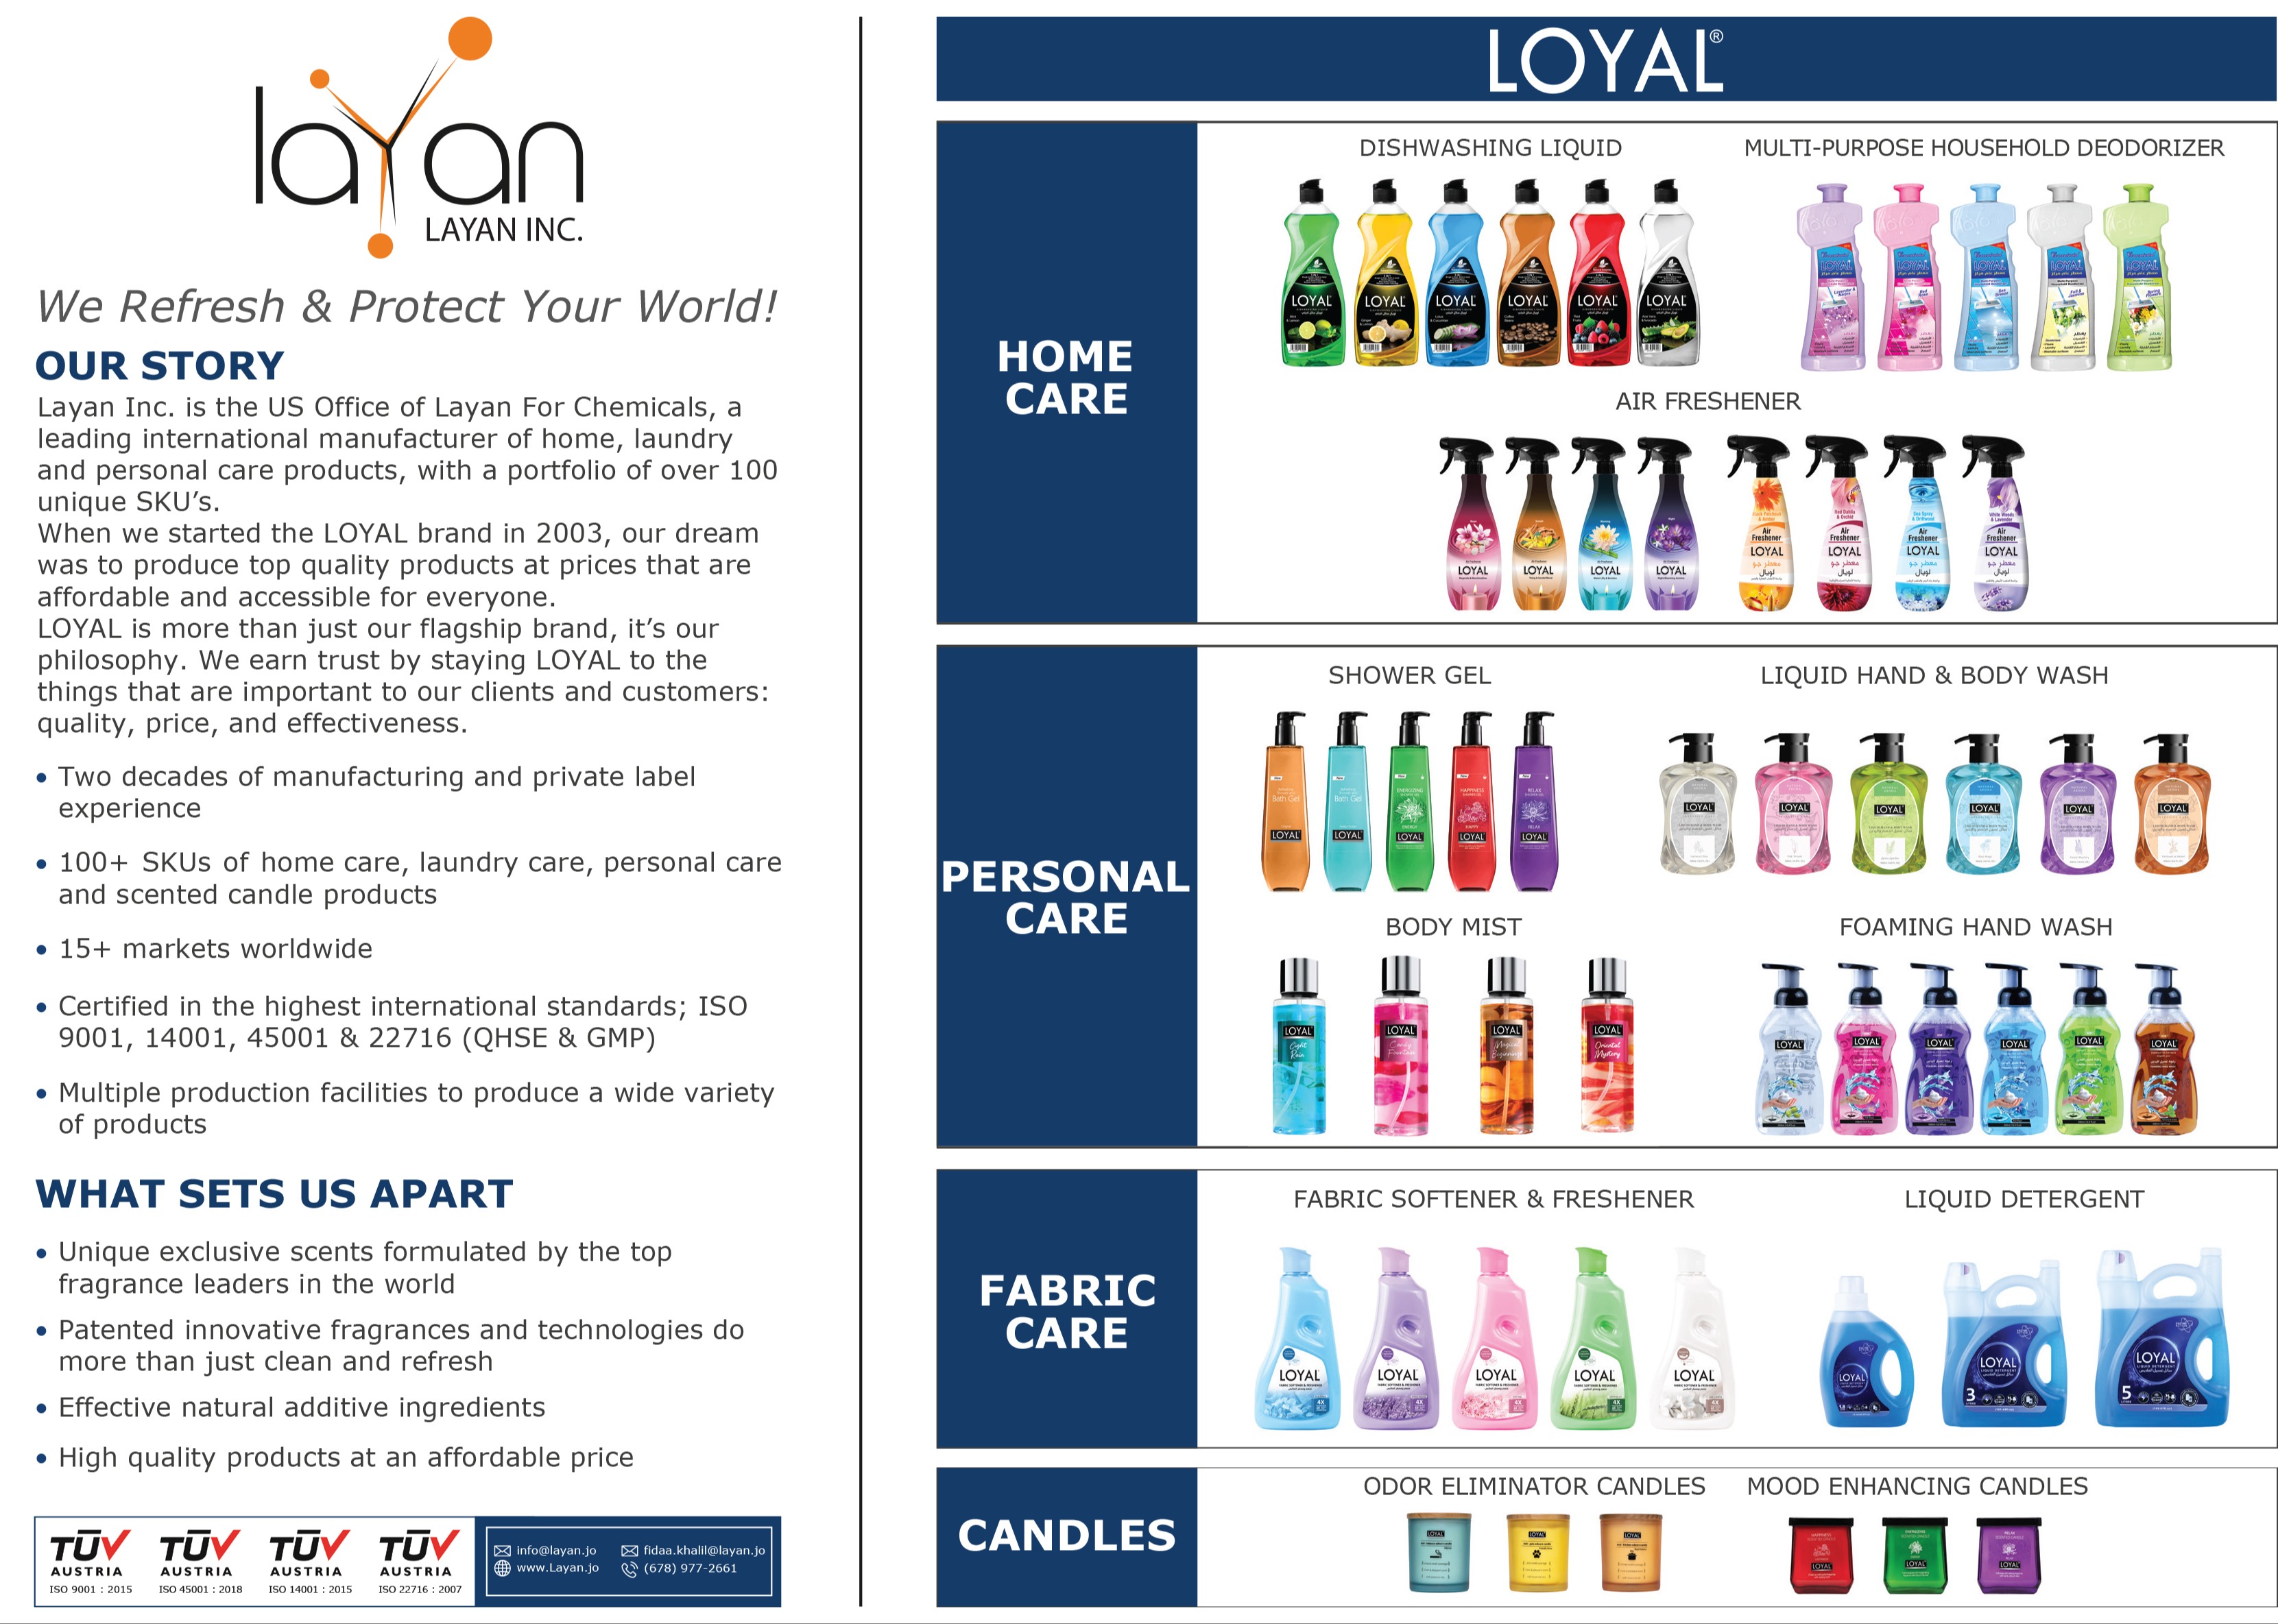 LOYAL Home, Laundry & Personal Care 633